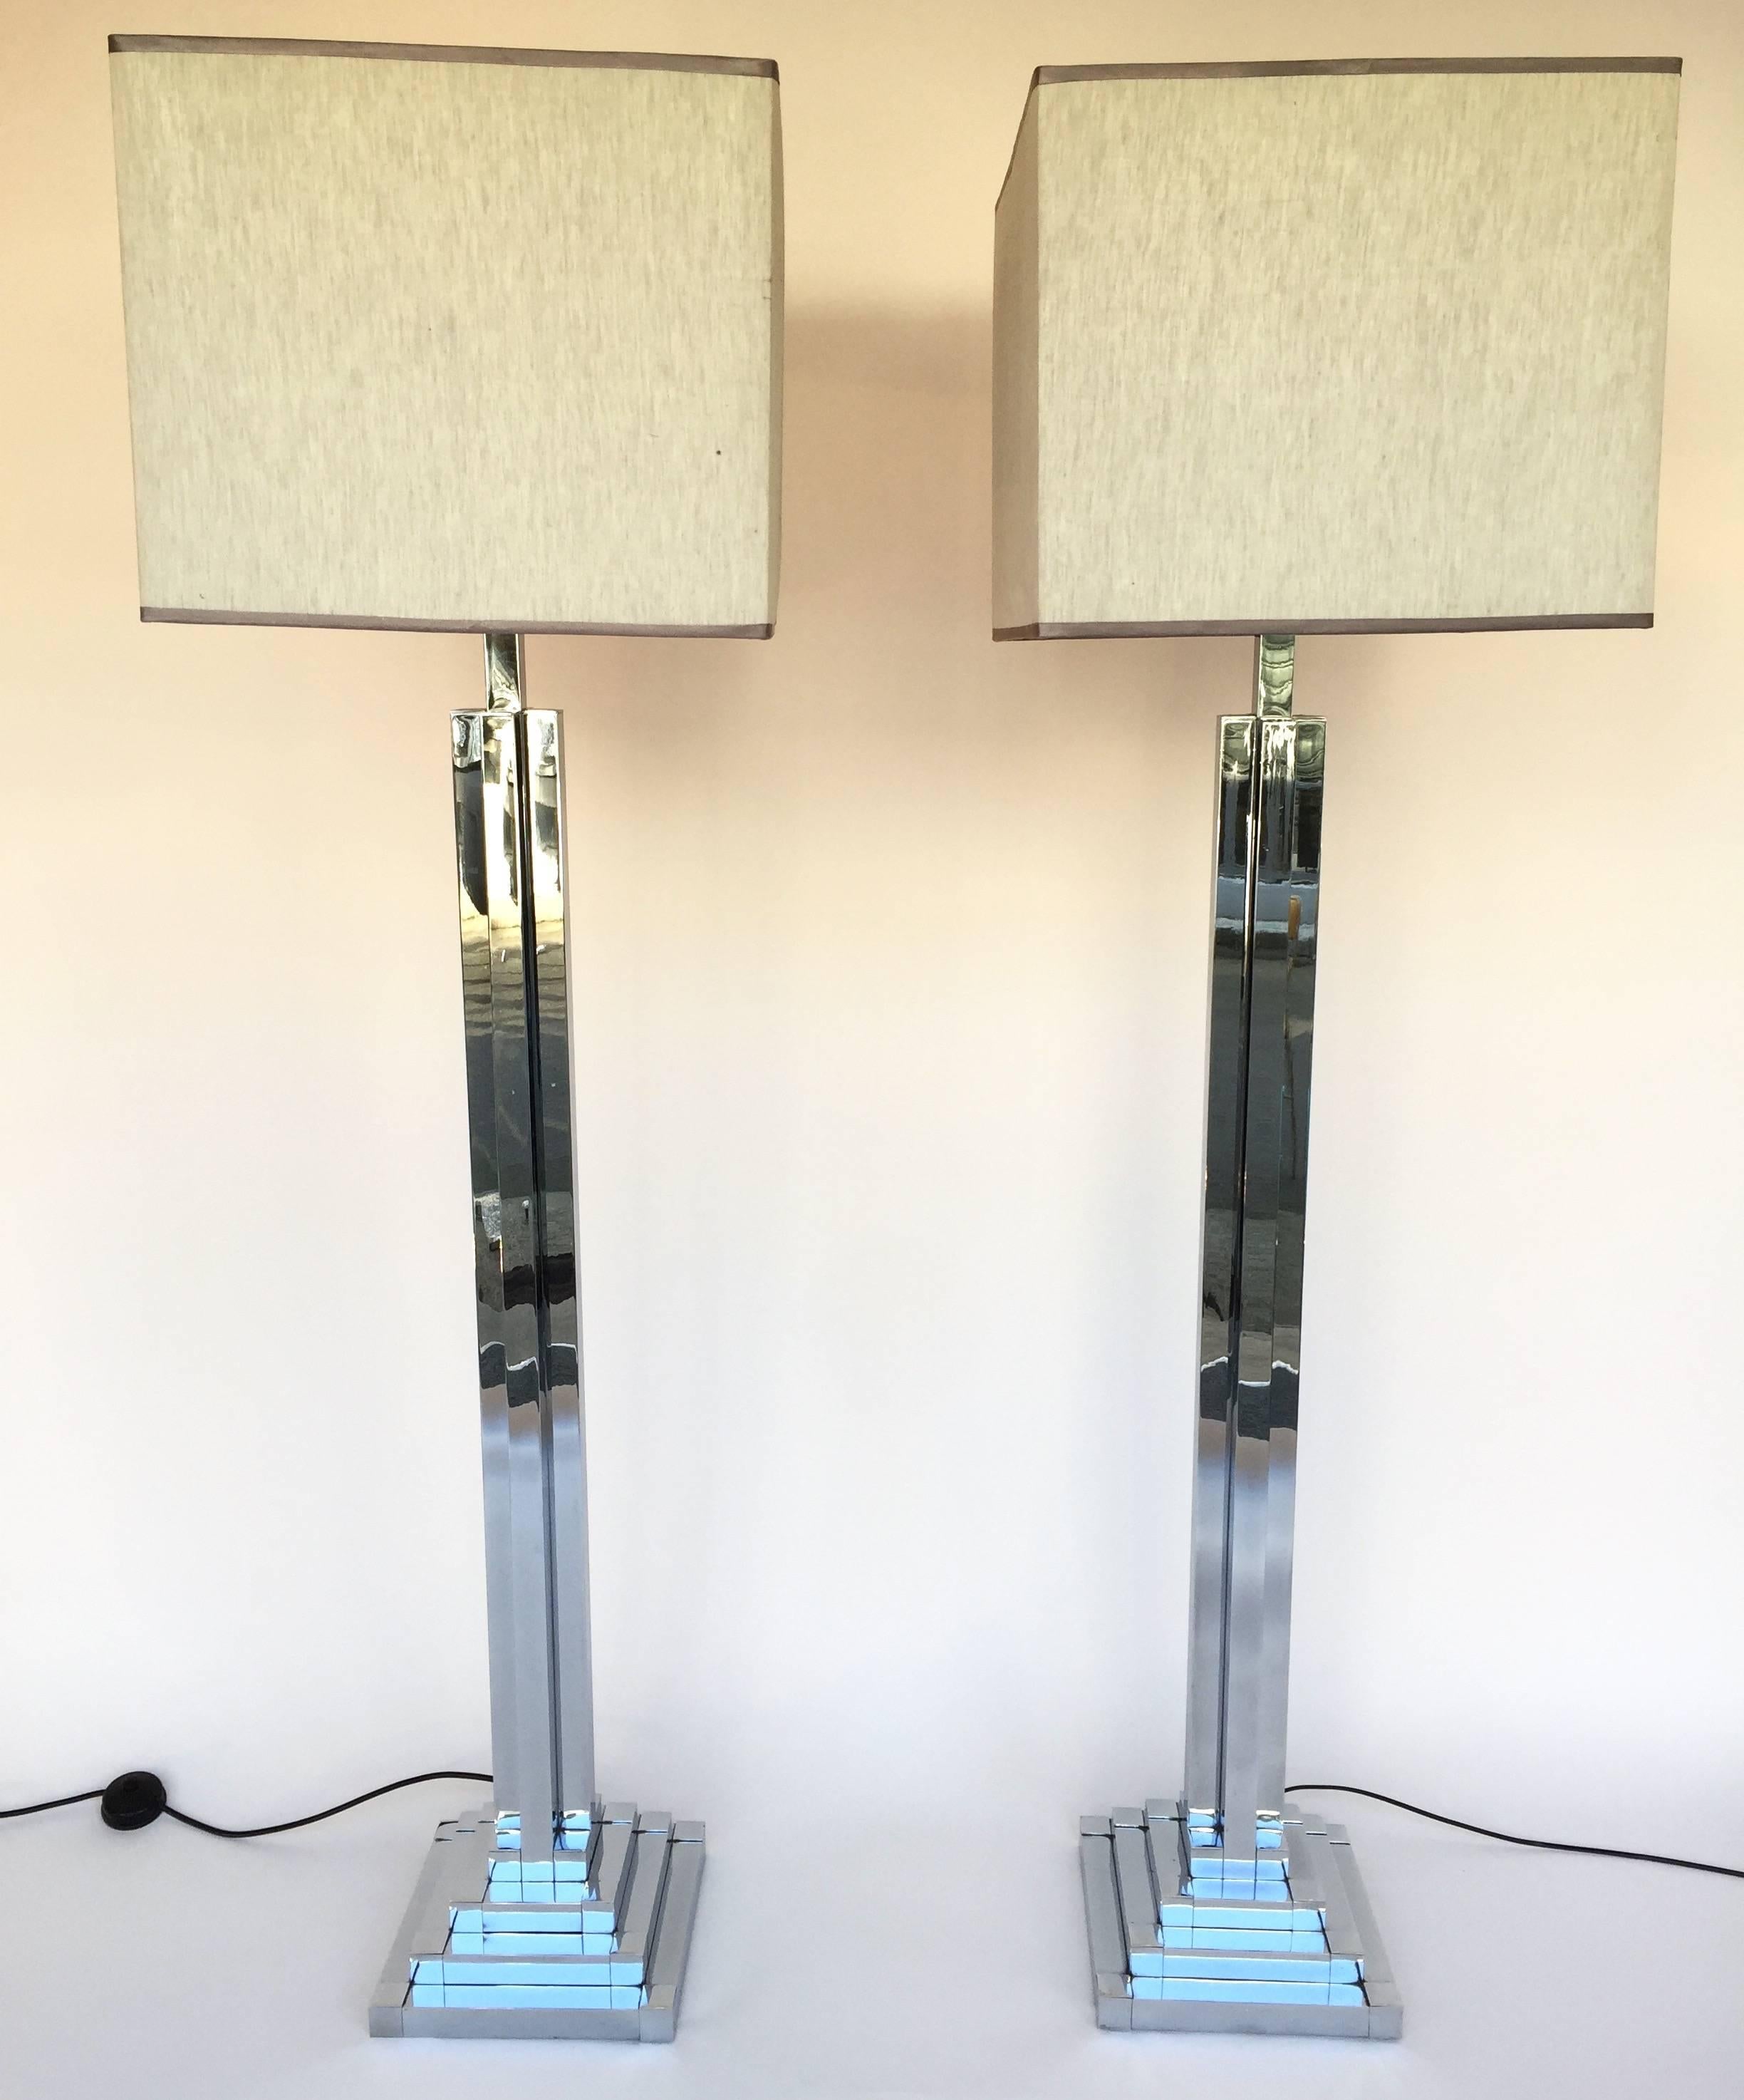 Rare model of Mid-Century Modern pair of pyramidal floor lamps in metal chrome by the designer Willy Rizzo for the editor Lumica. Great mirror finition. Original lampshade.